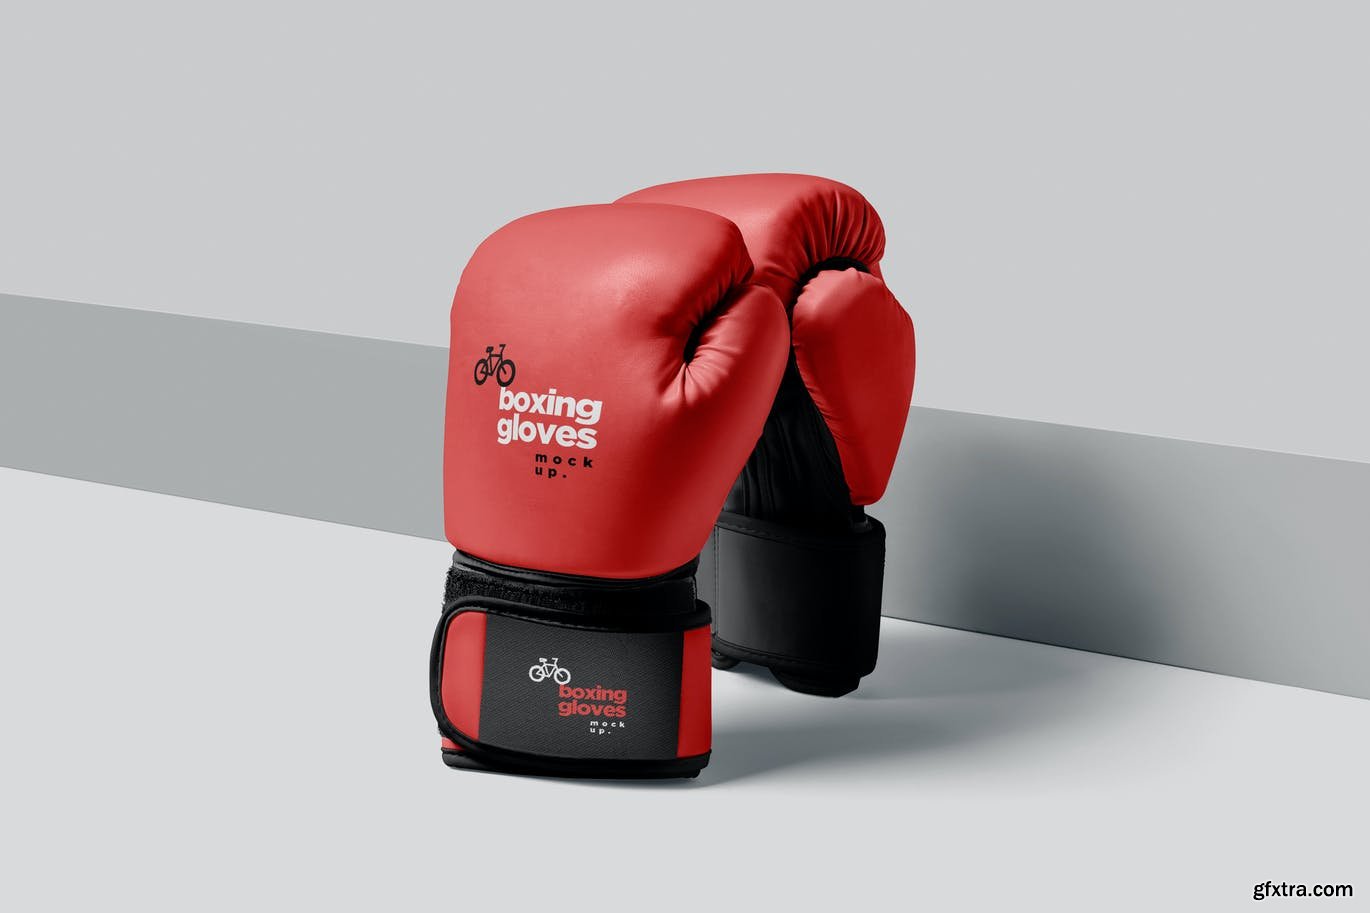 social gloves boxing live stream free